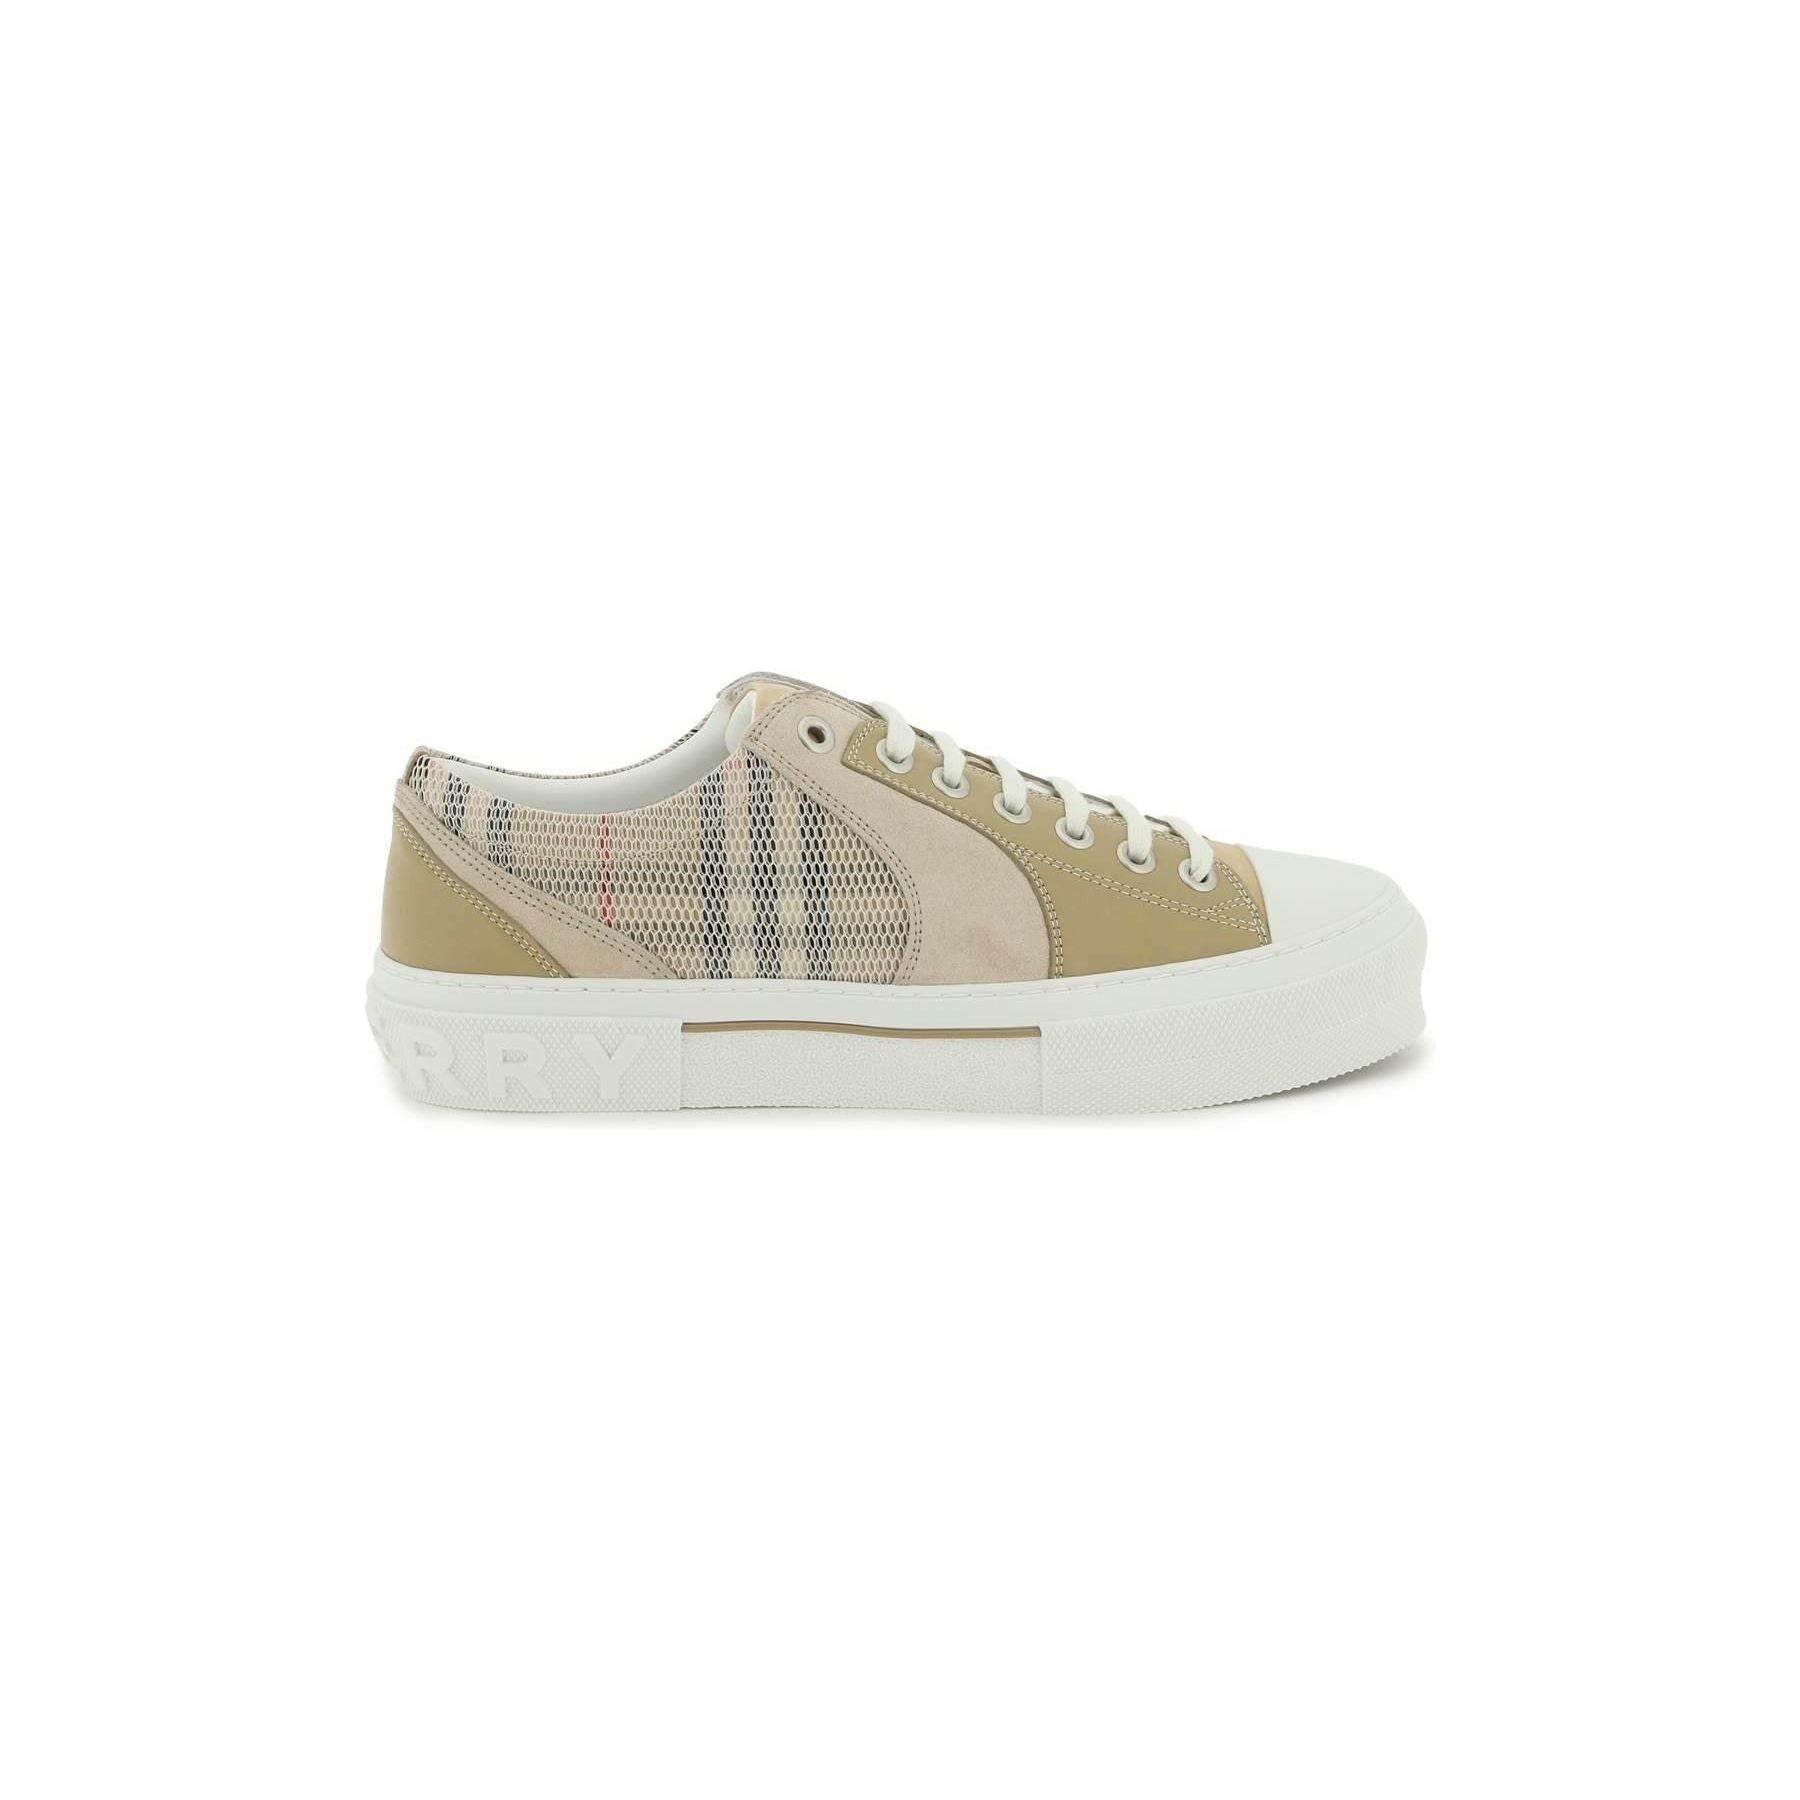 Vintage Check Leather Sneakers BURBERRY JOHN JULIA.